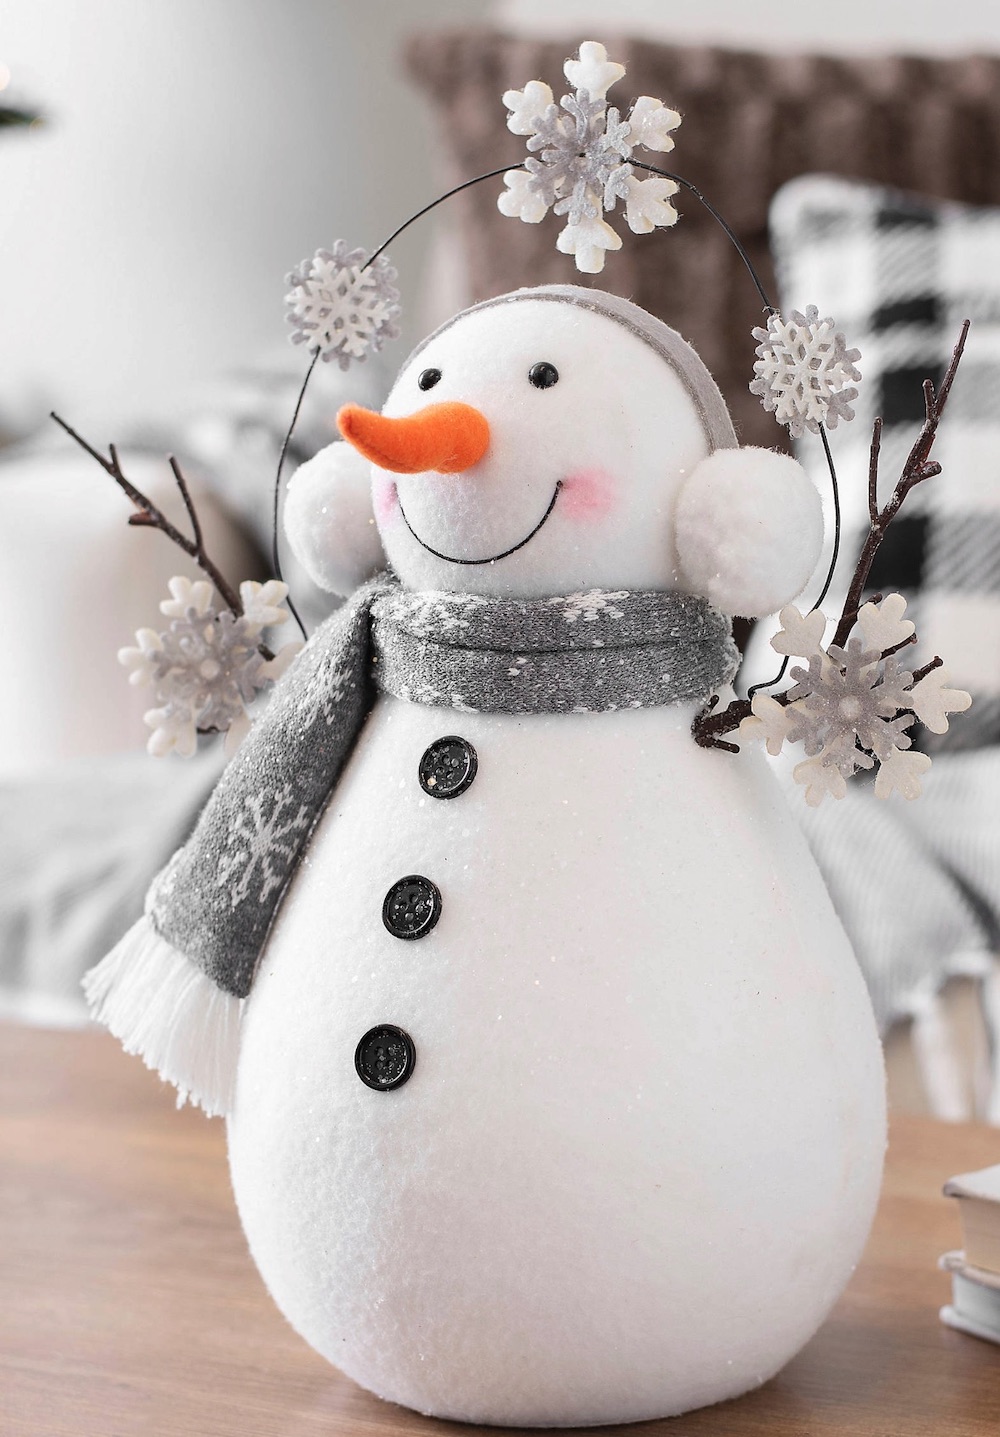 Christmas Decorations Snowman with Snowflakes Statue #Decor #Christmas #ChristmasDecor #HomeDecor #ChristmasHomeDecor #HolidayDecor